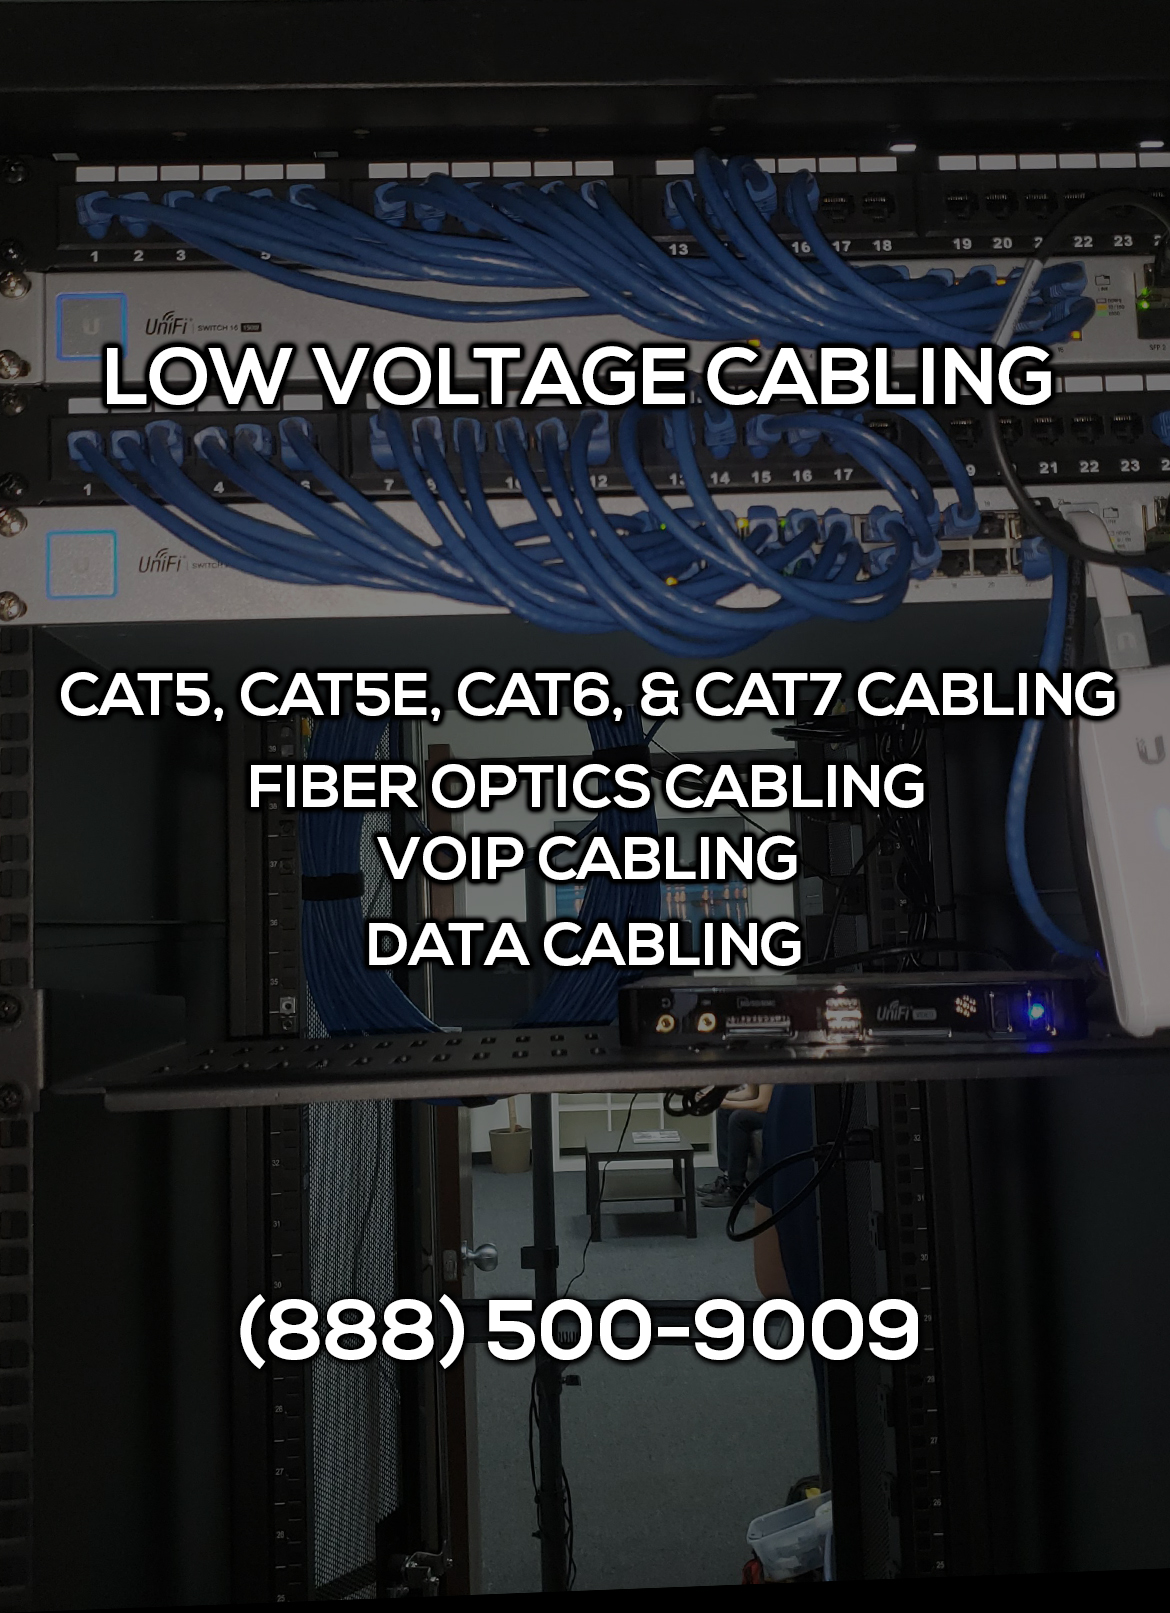 Low Voltage Cabling in Upland CA